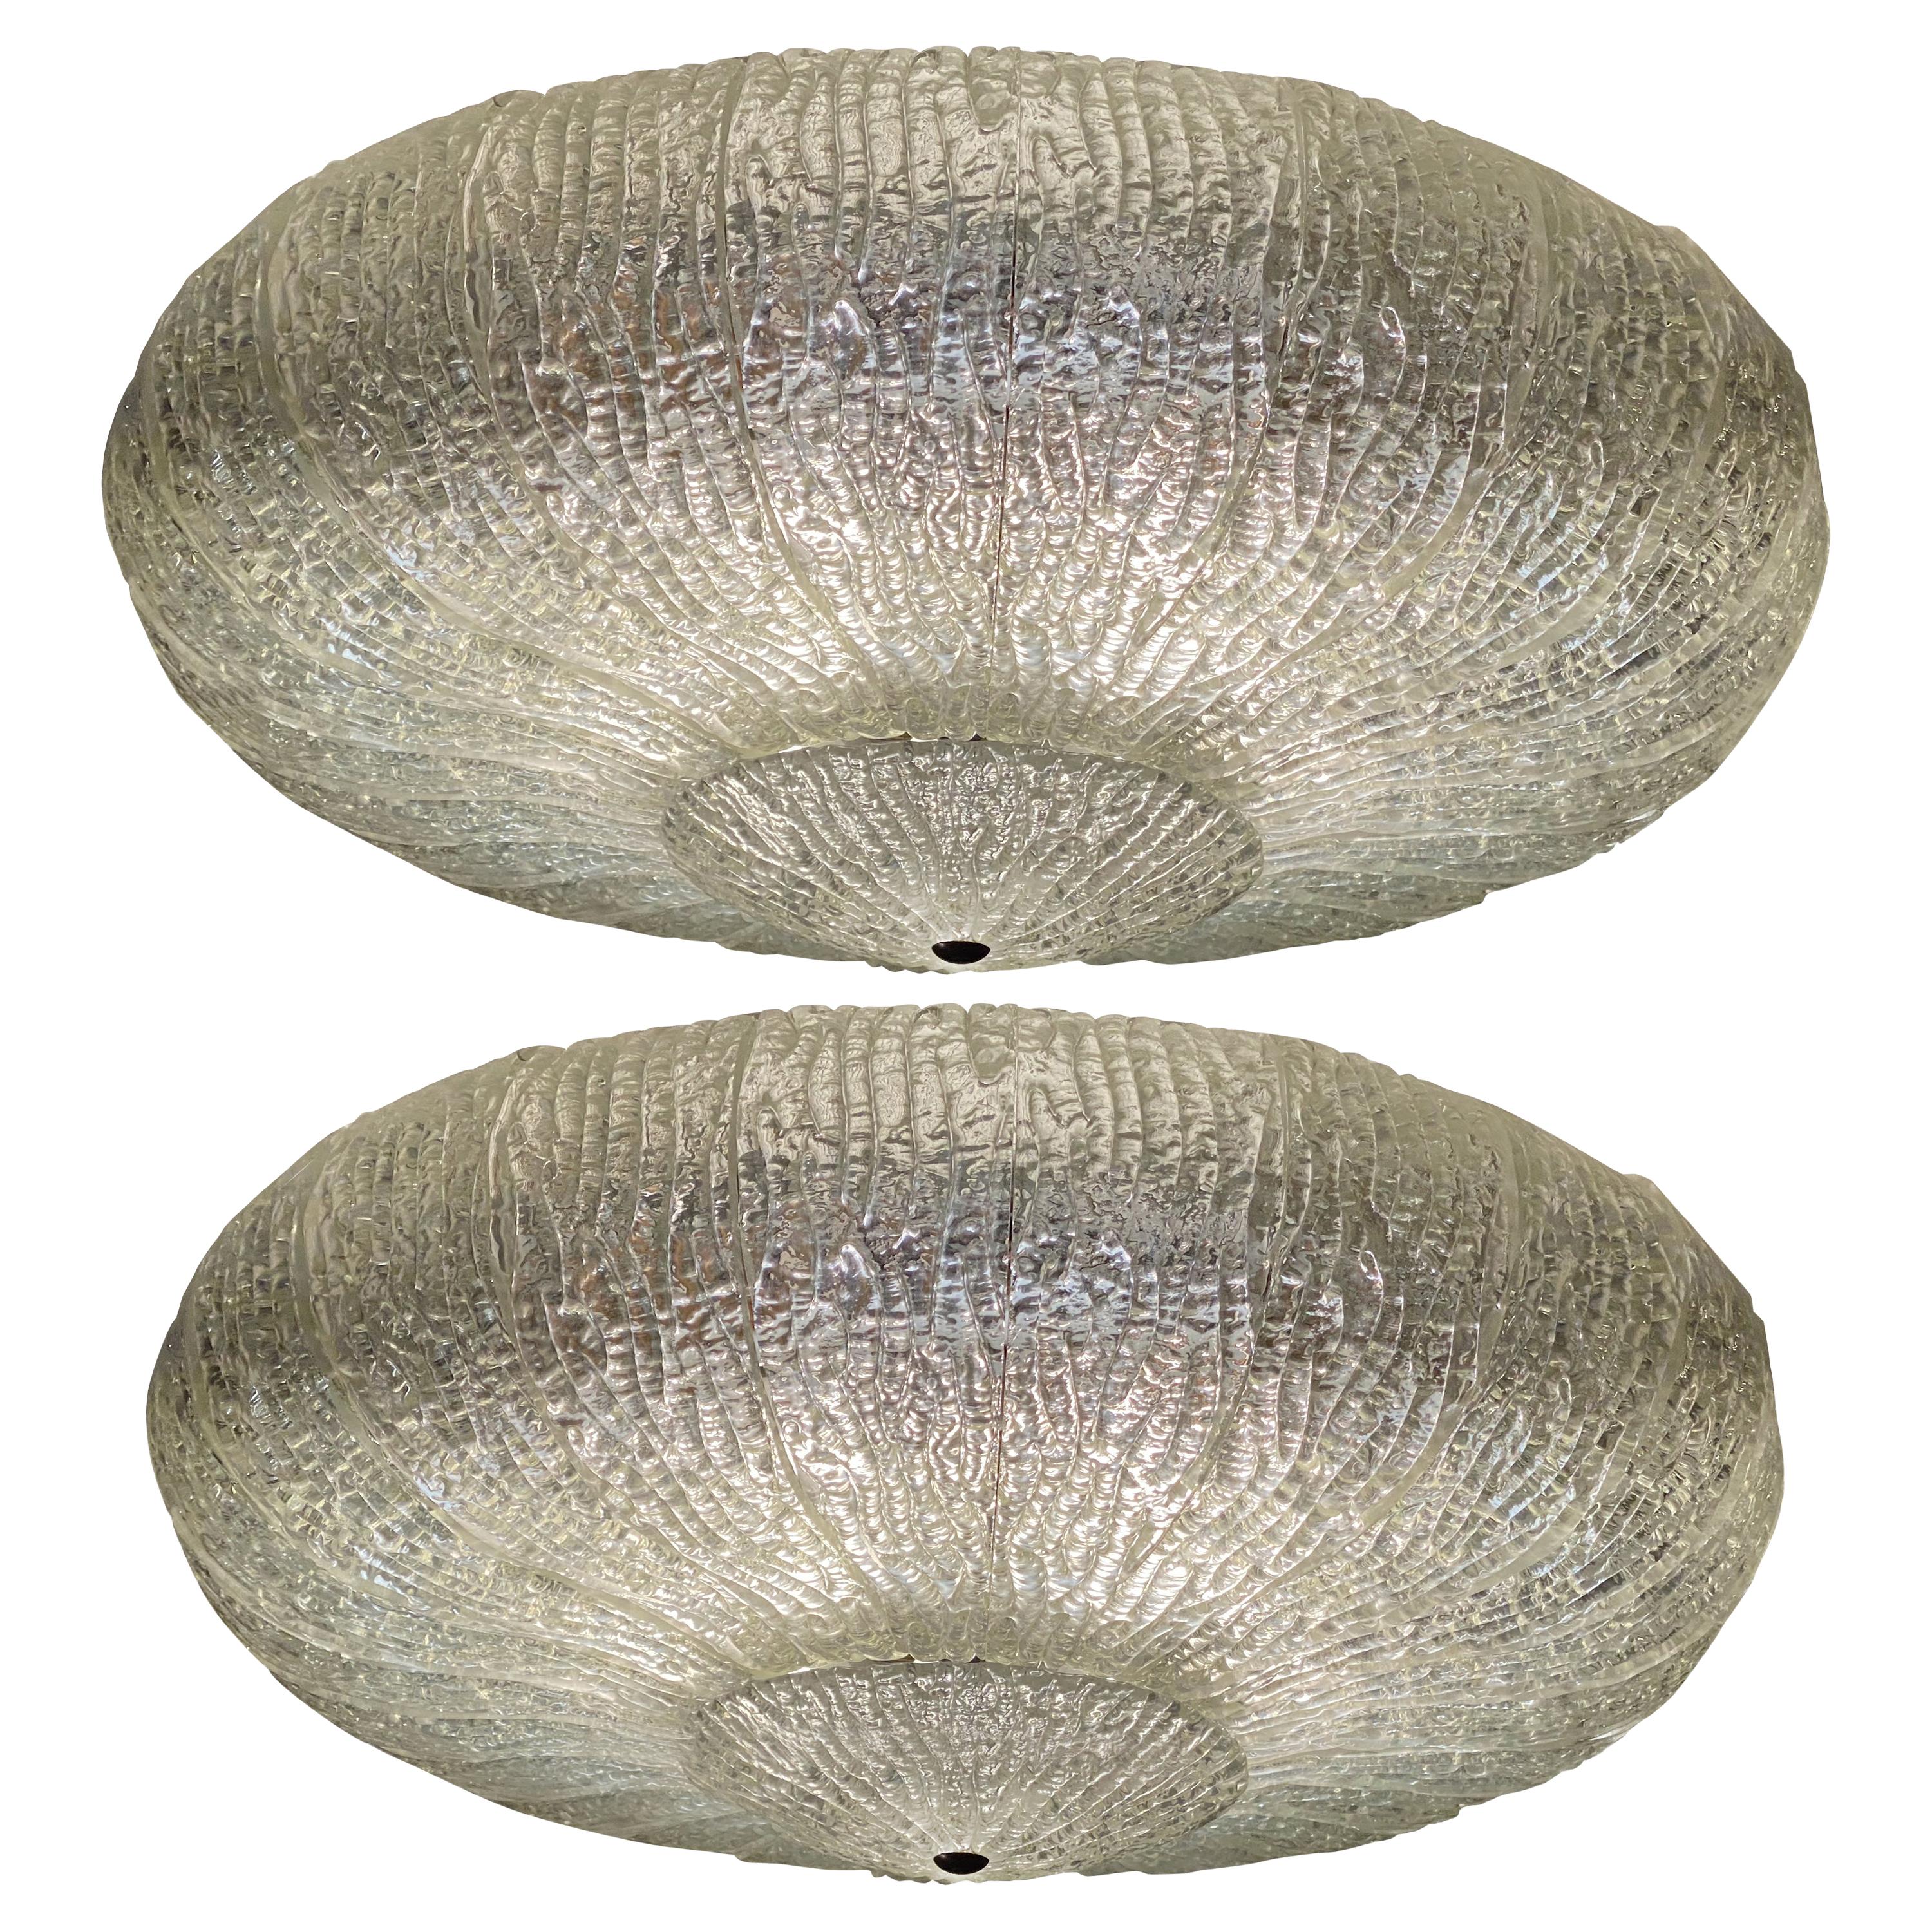 Pair Original Large Ceiling Flush Mount Lights by Barovier & Toso, Murano, 1940s